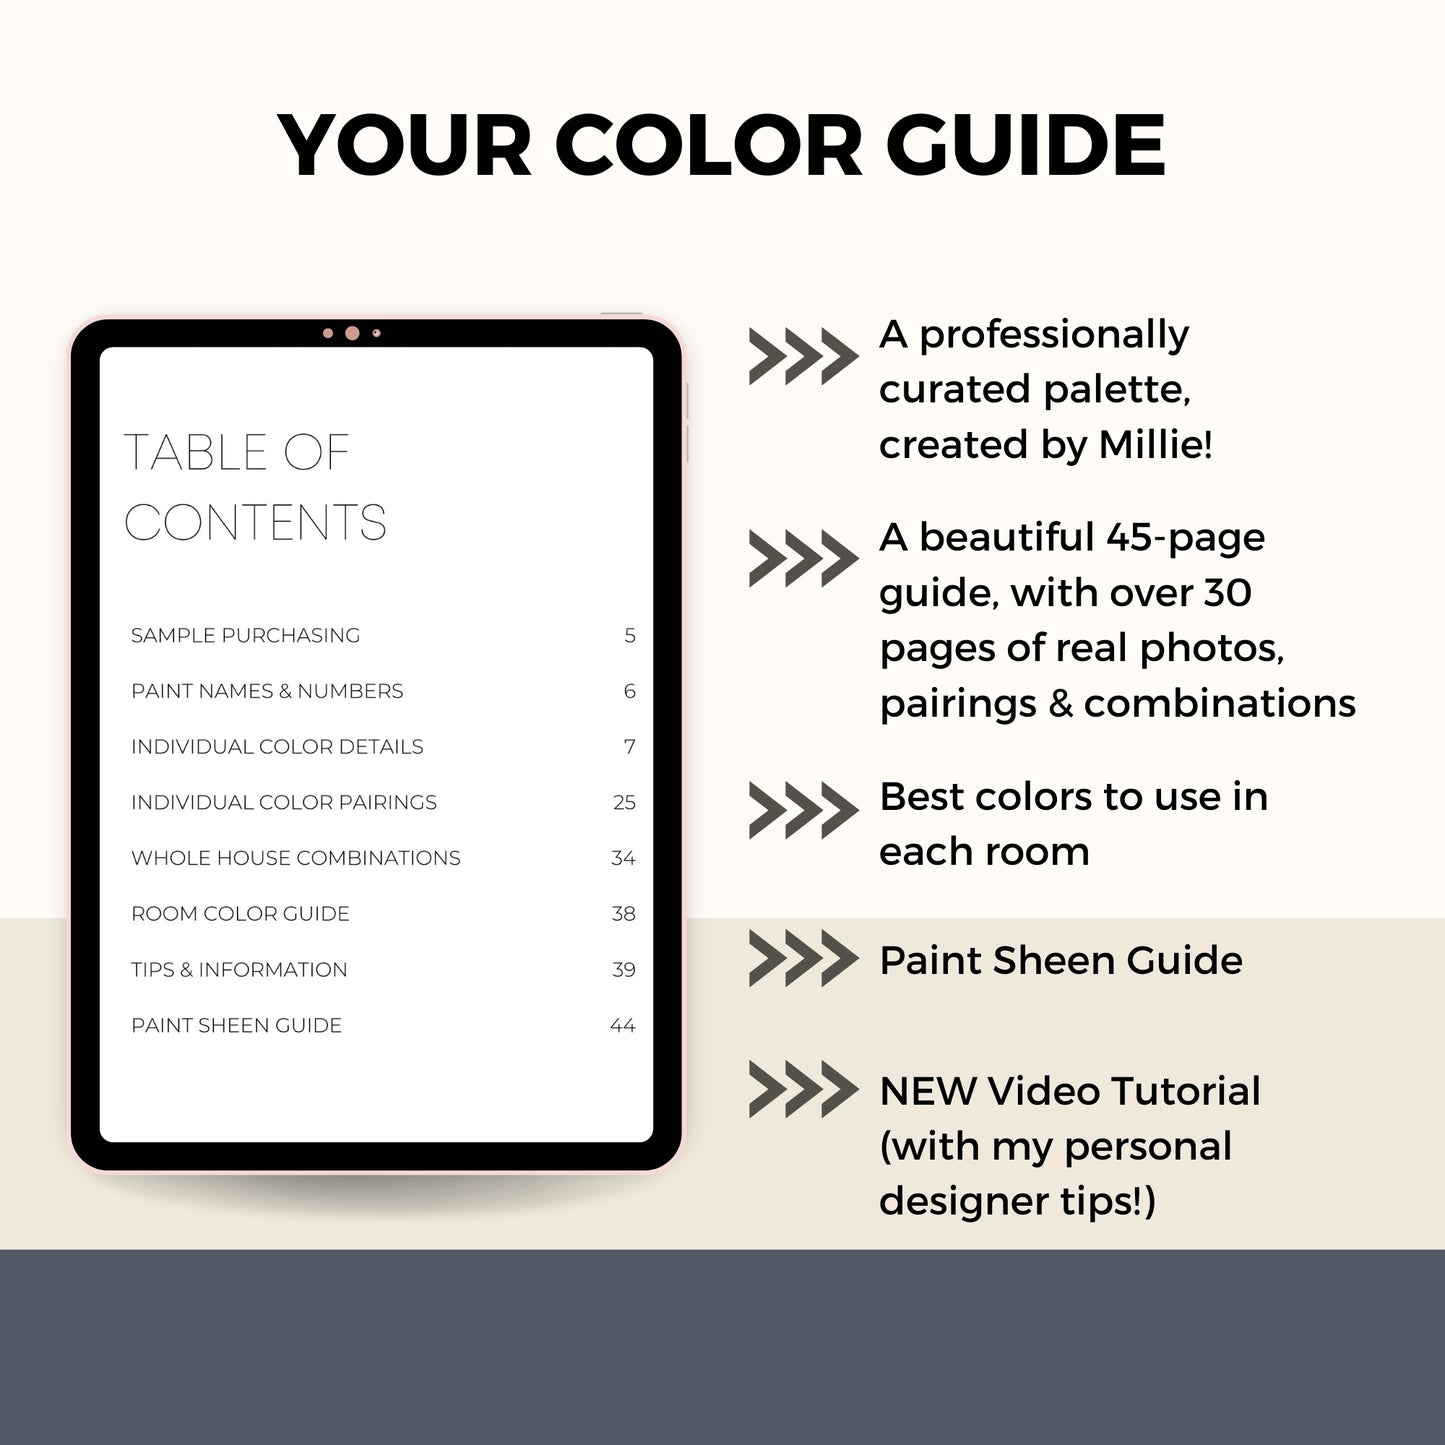 Lake House Sherwin Williams Paint Palette - Modern Neutral Interior Paint Colors for Home, Coastal Interior Design Color Palette, Lake House, Sherwin Williams Creamy